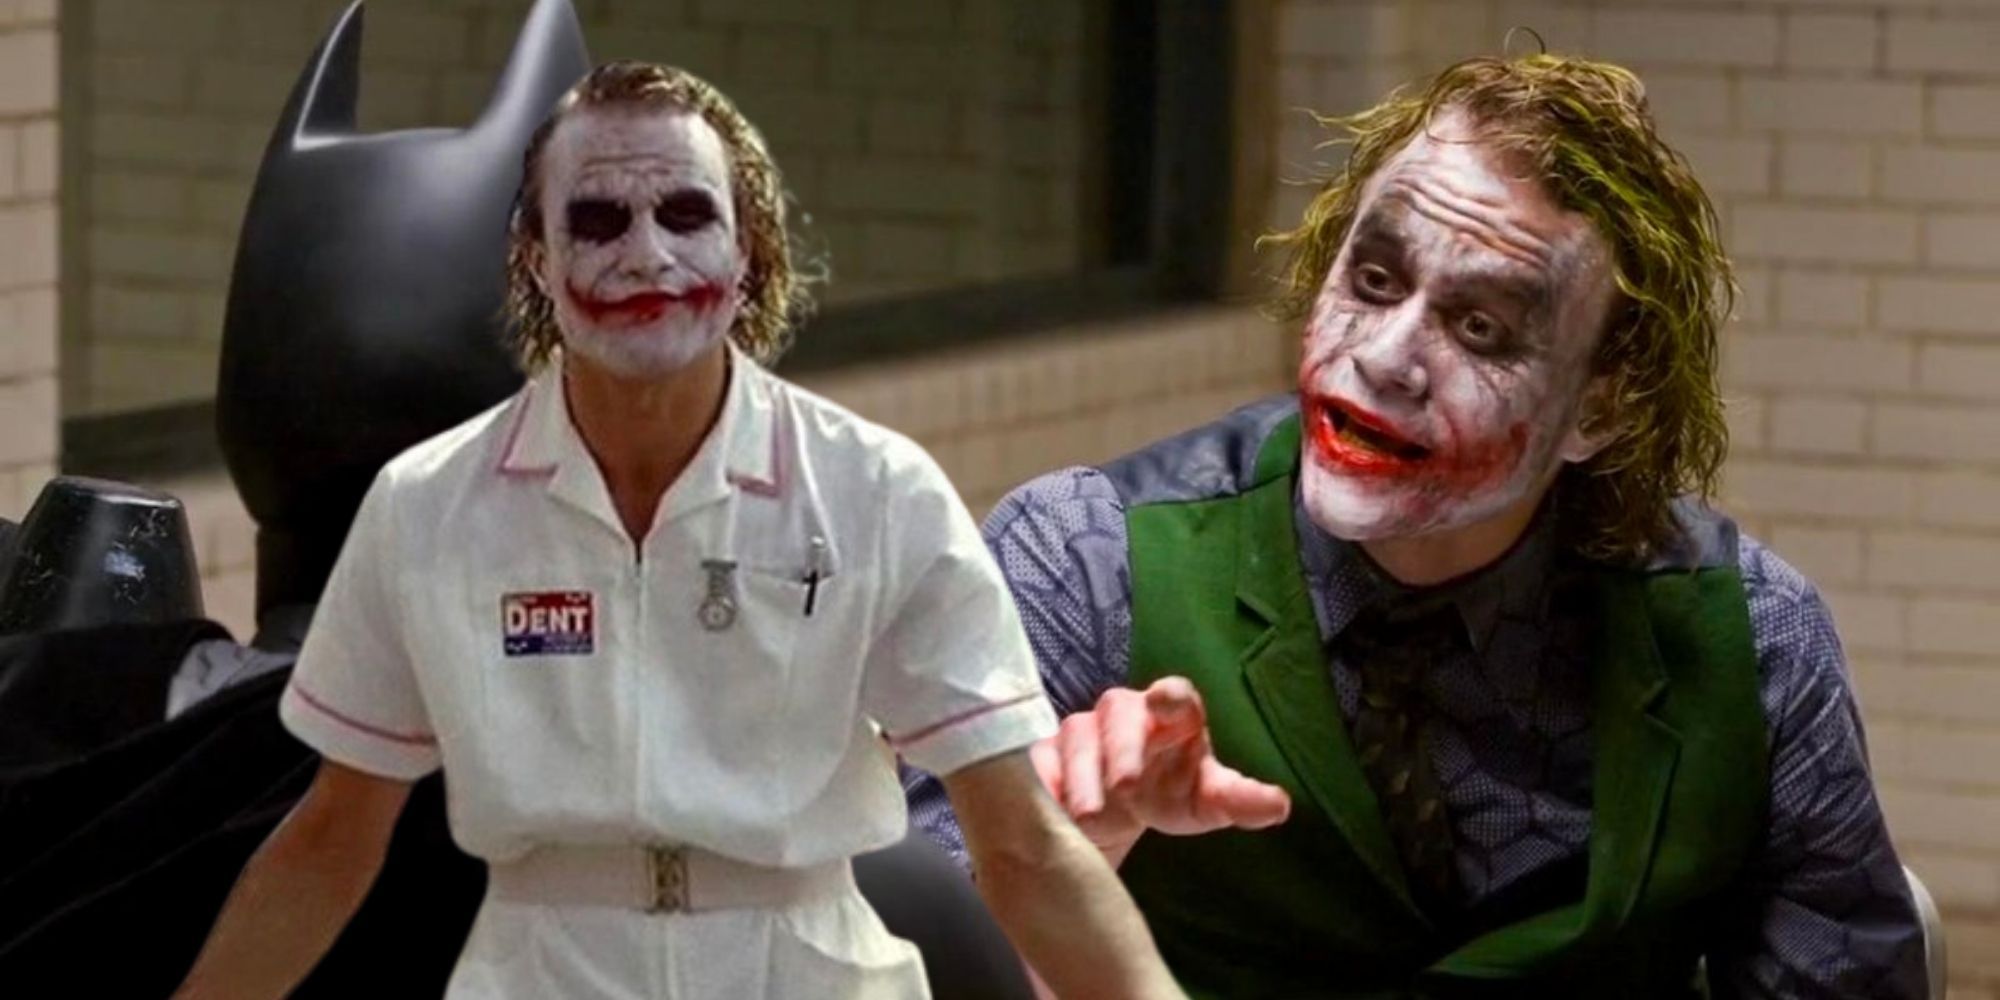 The Dark Knight Heath Ledger Joker talking to Batman and in a nurse outfit after blowing up the hospital